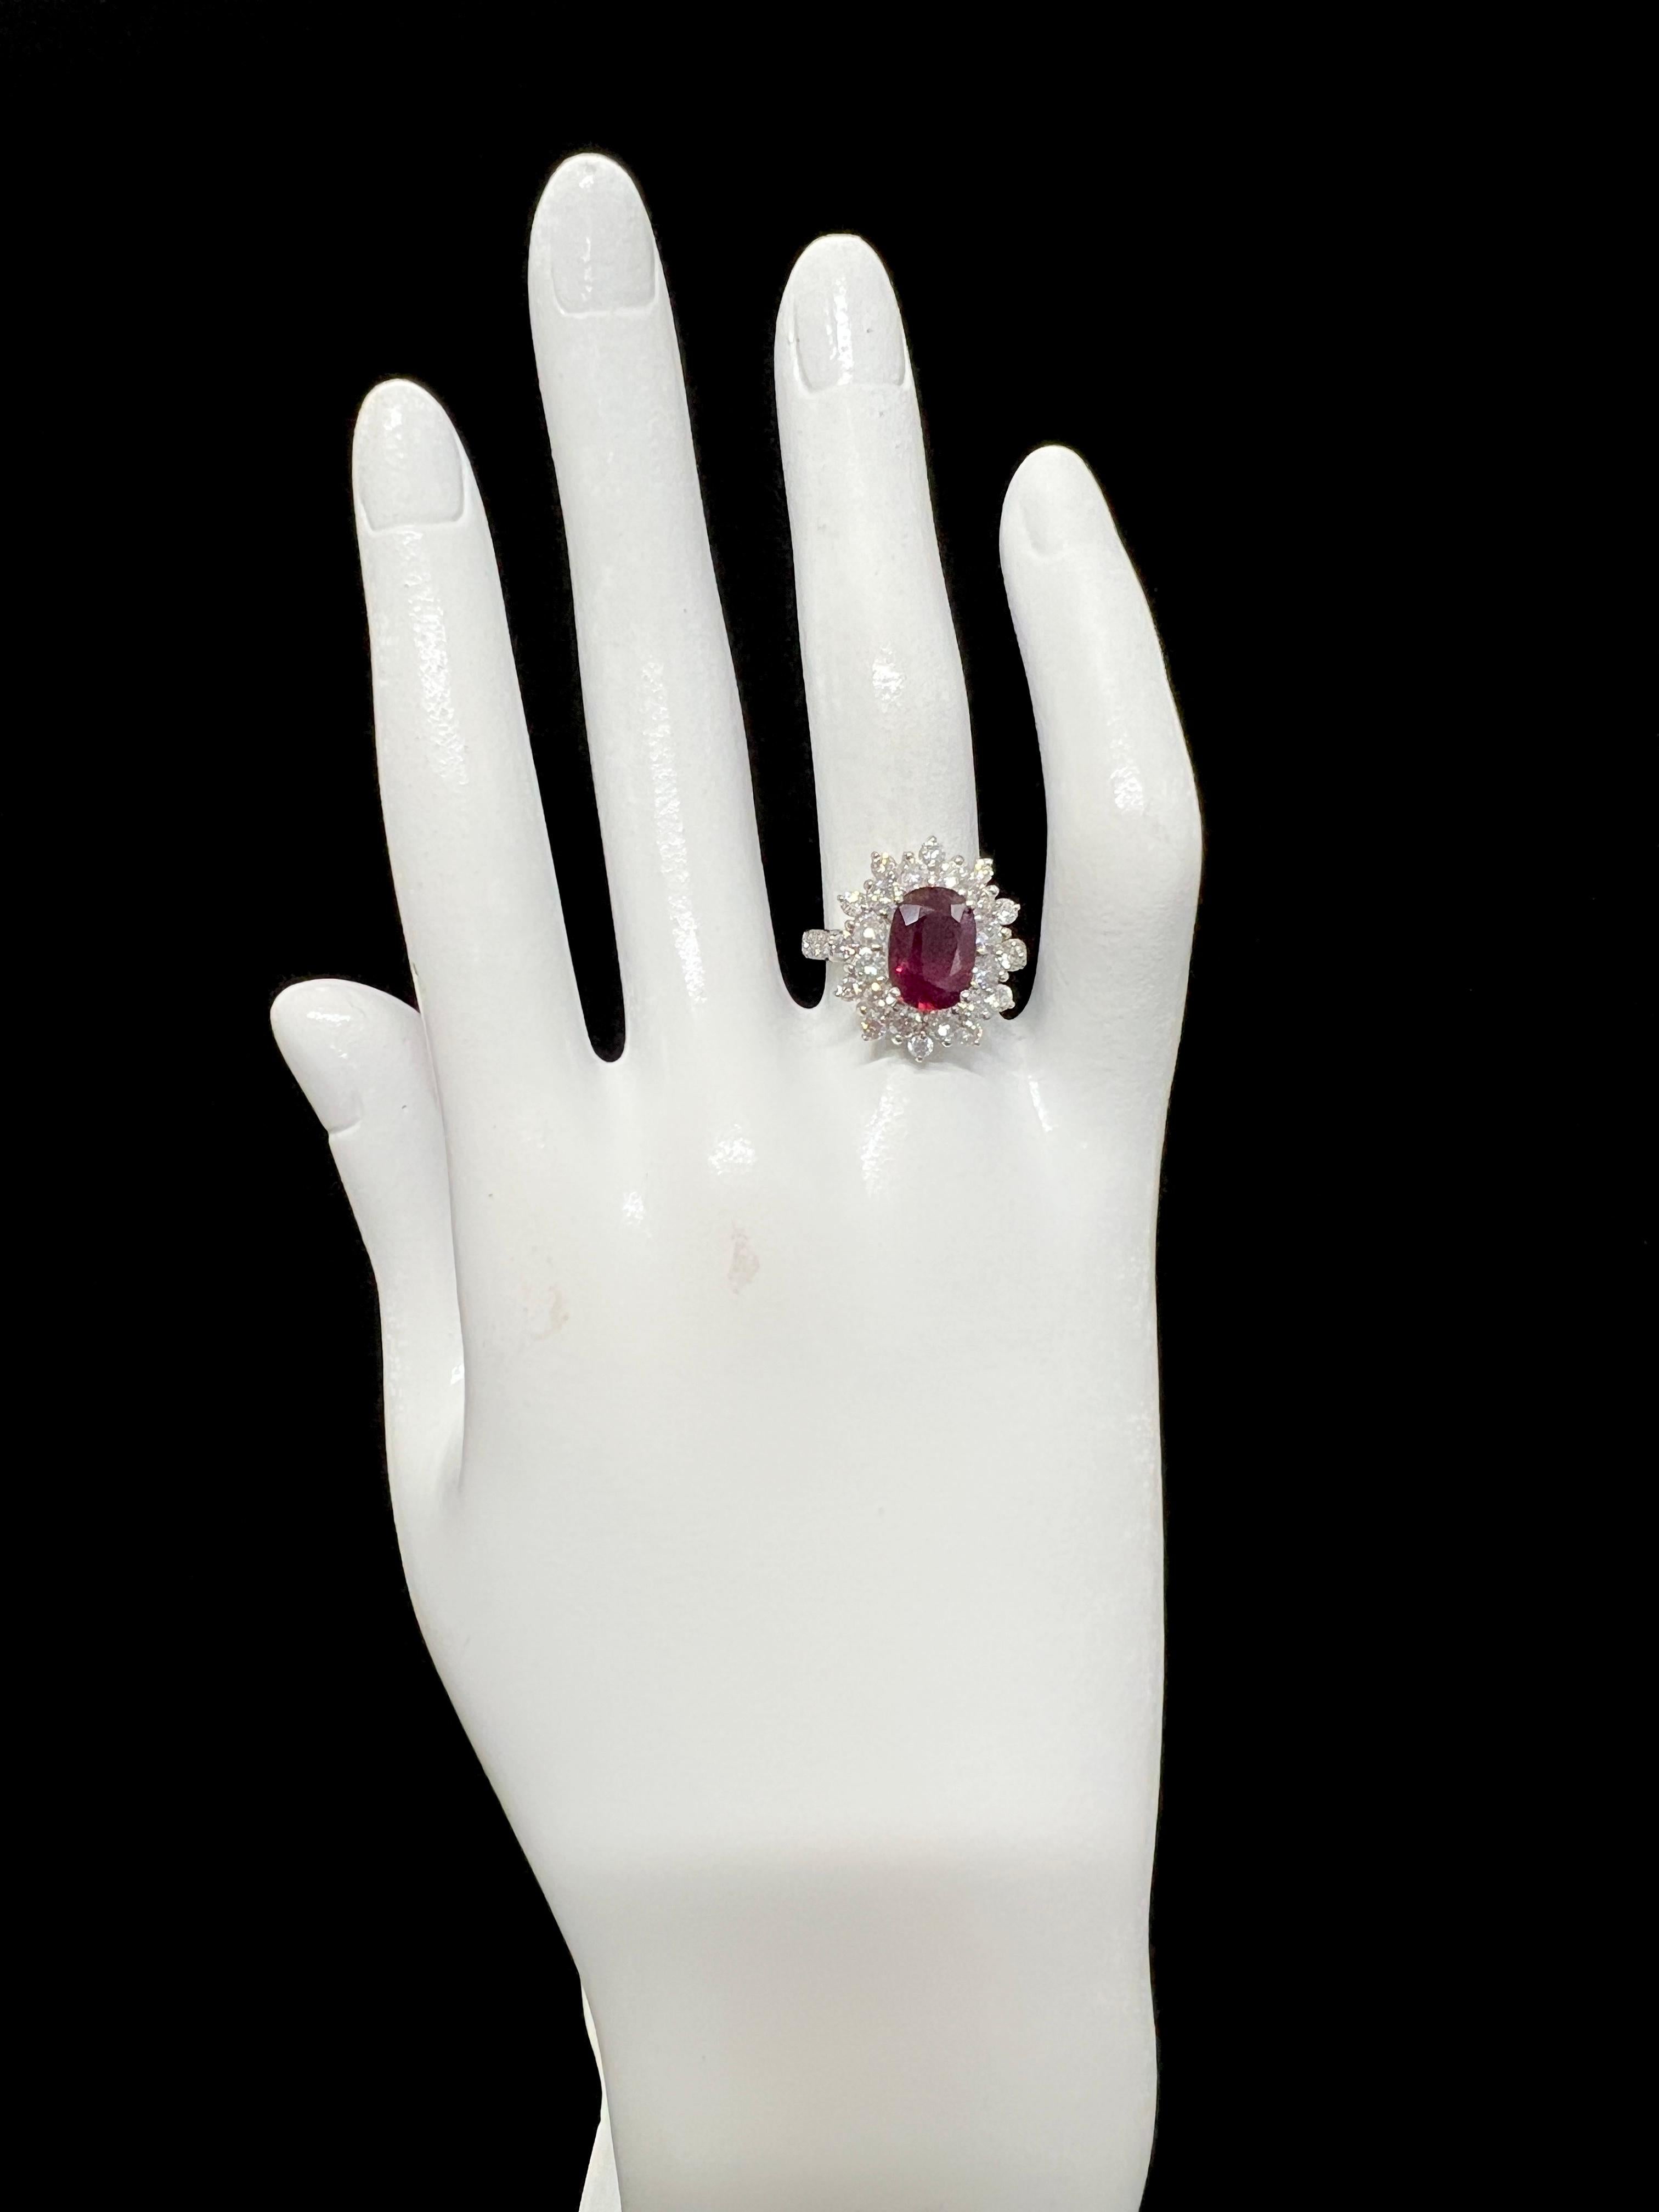 GIA Certified 2.97 Carat Siam Ruby and Diamond Ring Made in Platinum For Sale 1